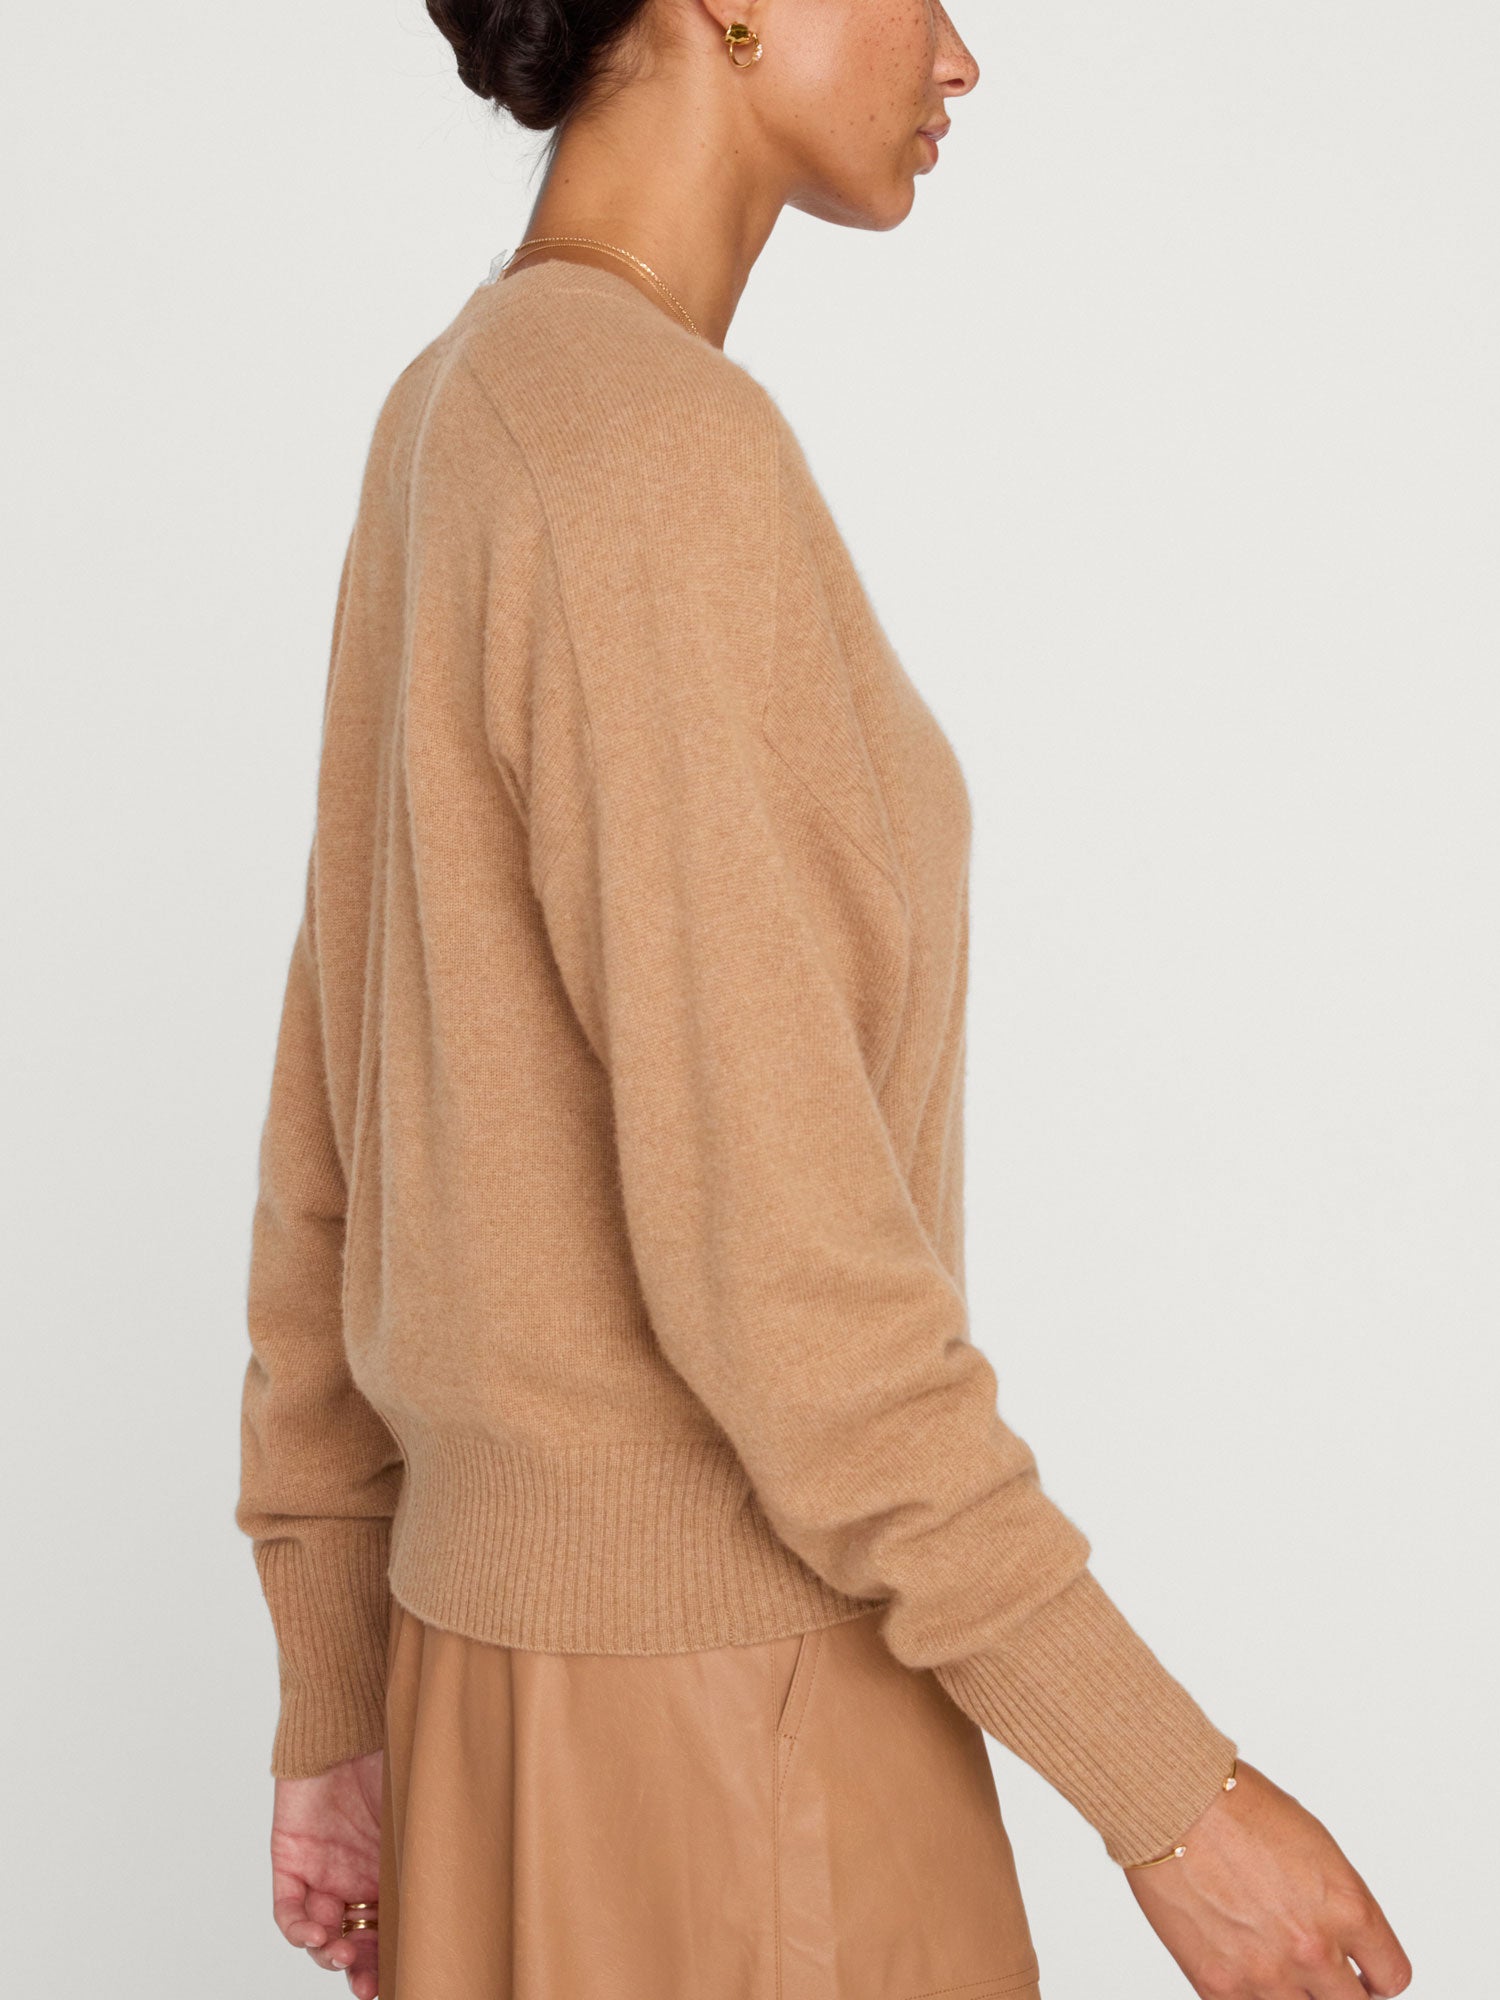 Leia V-neck tan sweater side view